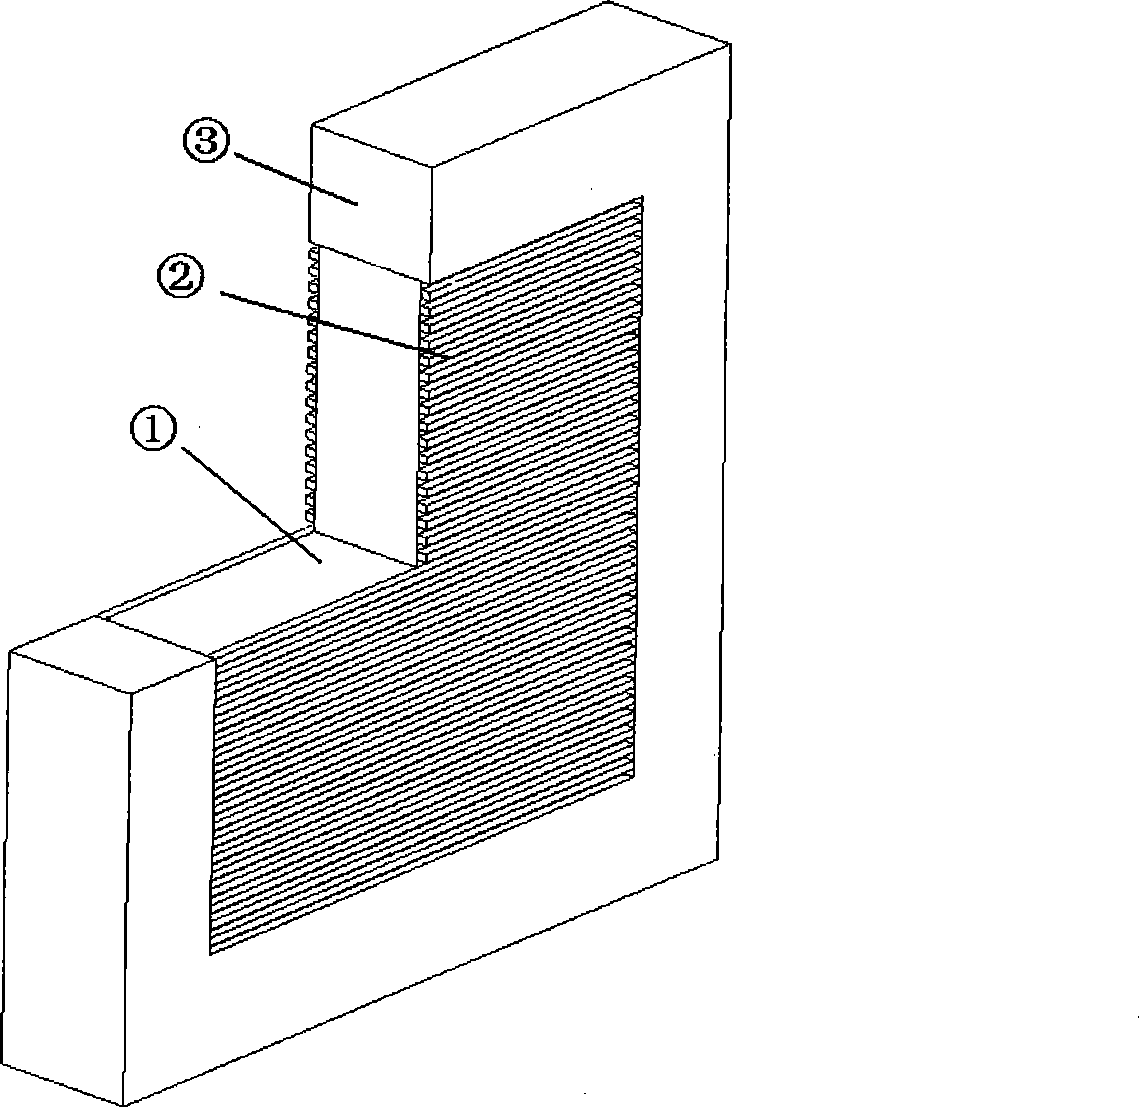 Method for designing fuel cell stack integral packaging by using equivalent stiffness mechanical model